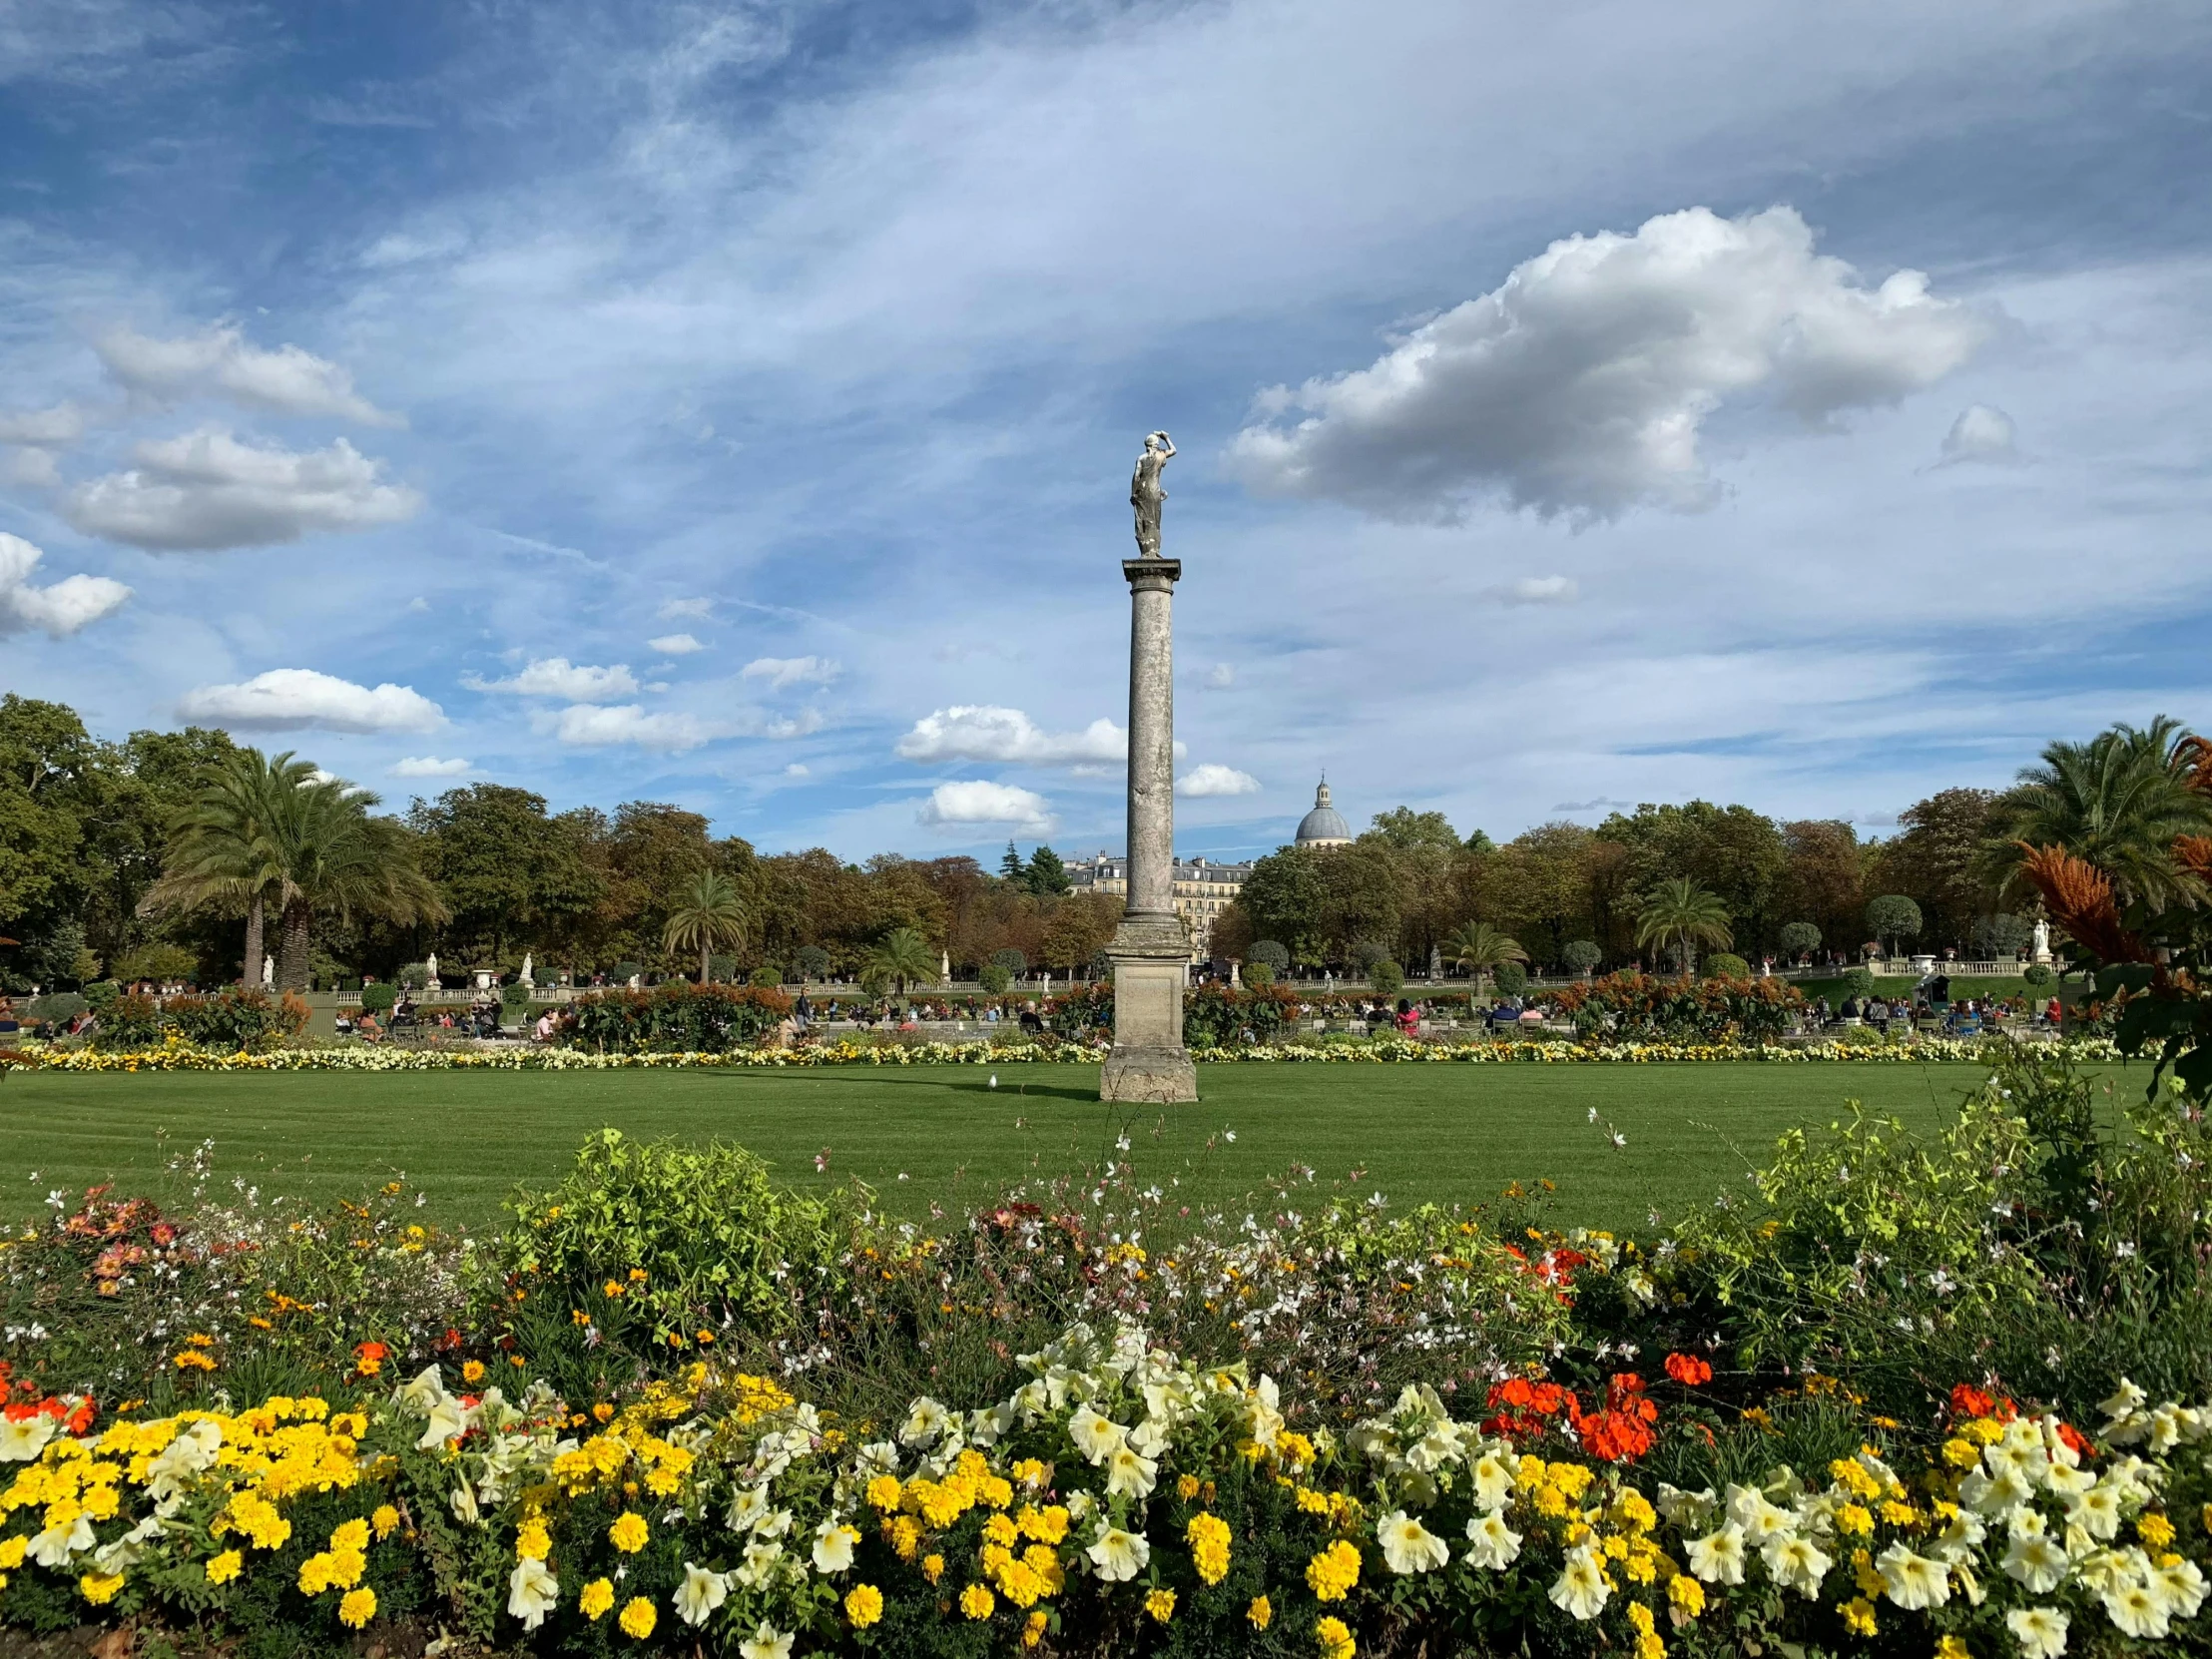 a flowered flower garden in the middle of a park with a tall statue